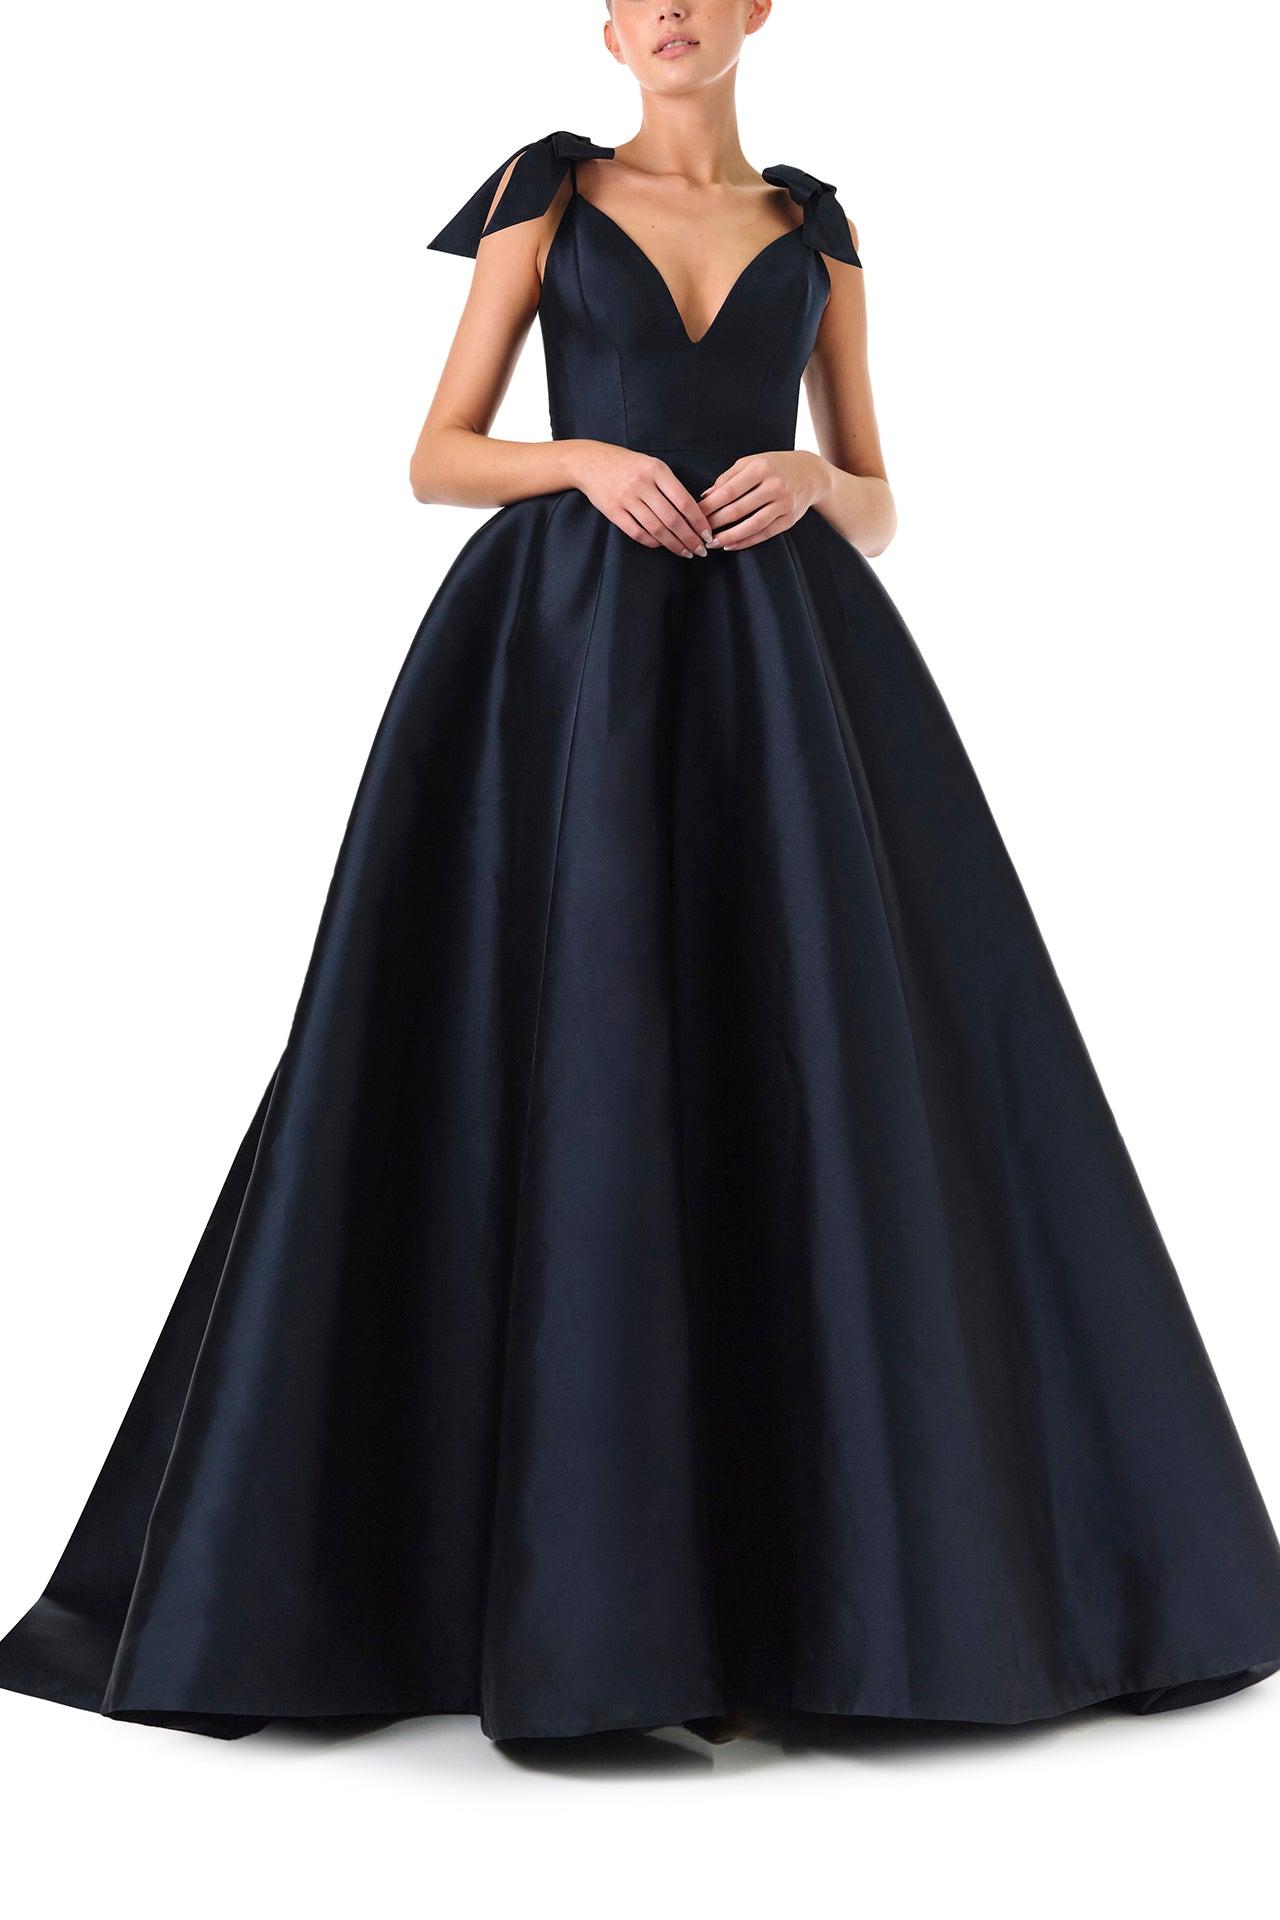 Monique Lhuillier Fall 2024 deep V-neck ball gown in navy mikado with full skirt and bow detail at shoulders - front two.